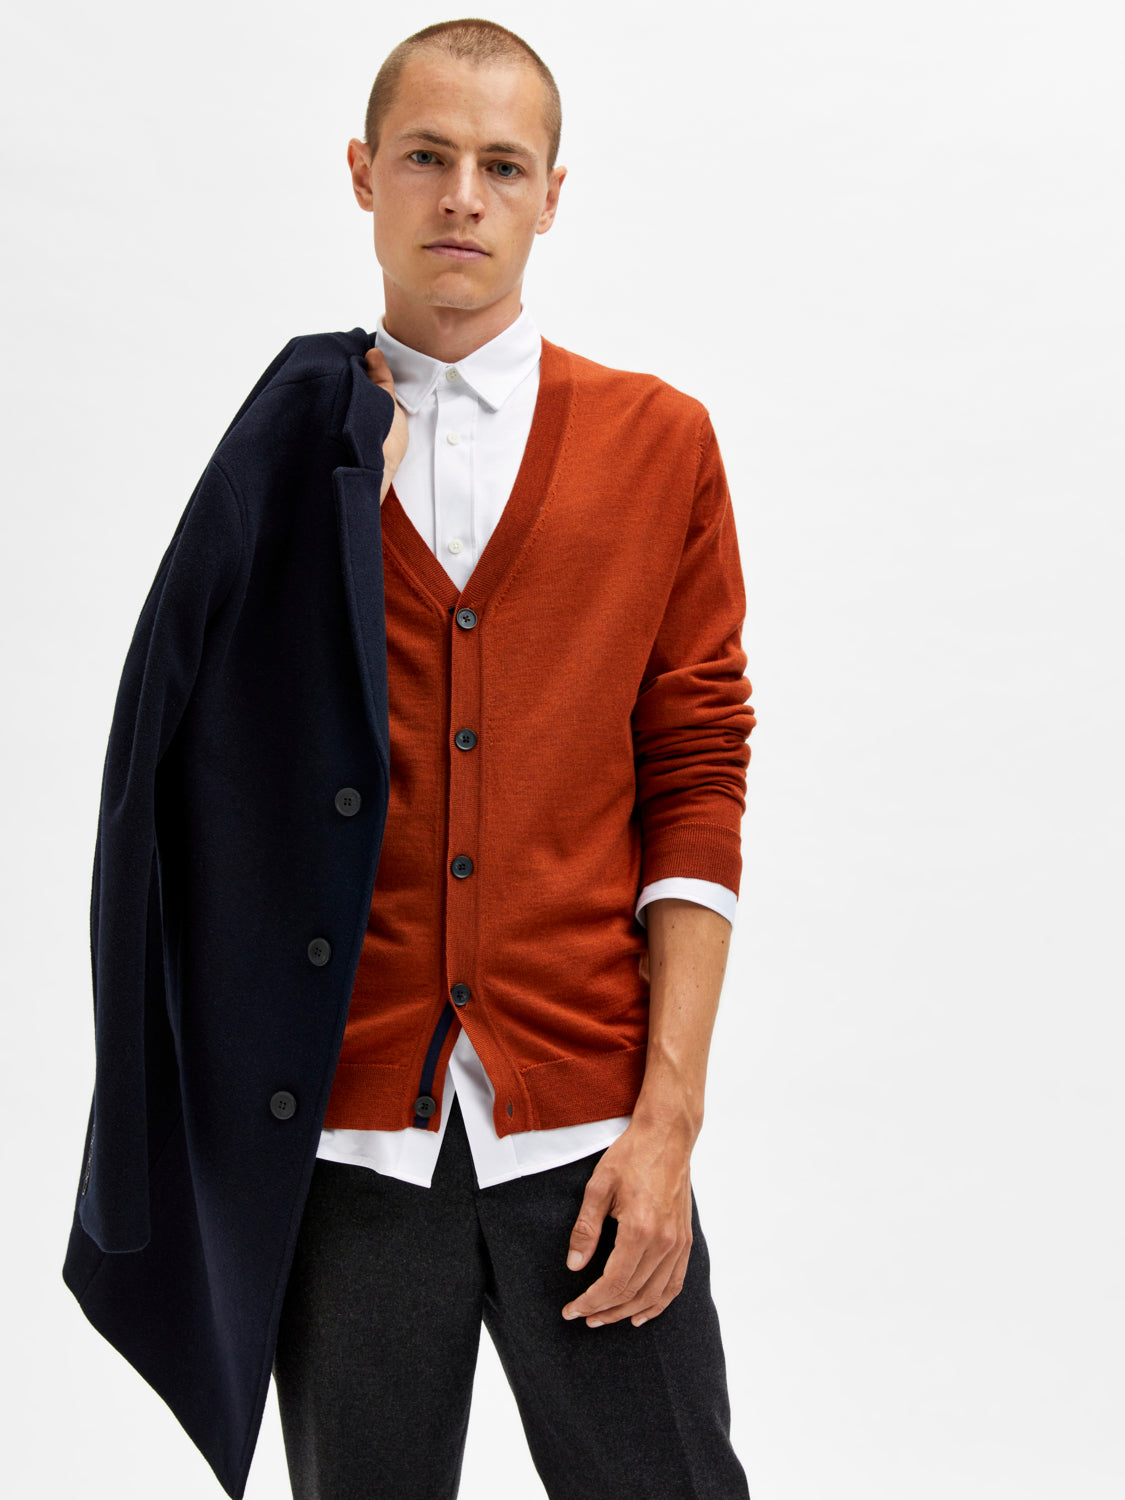 SLHTOWN Cardigan - Picante